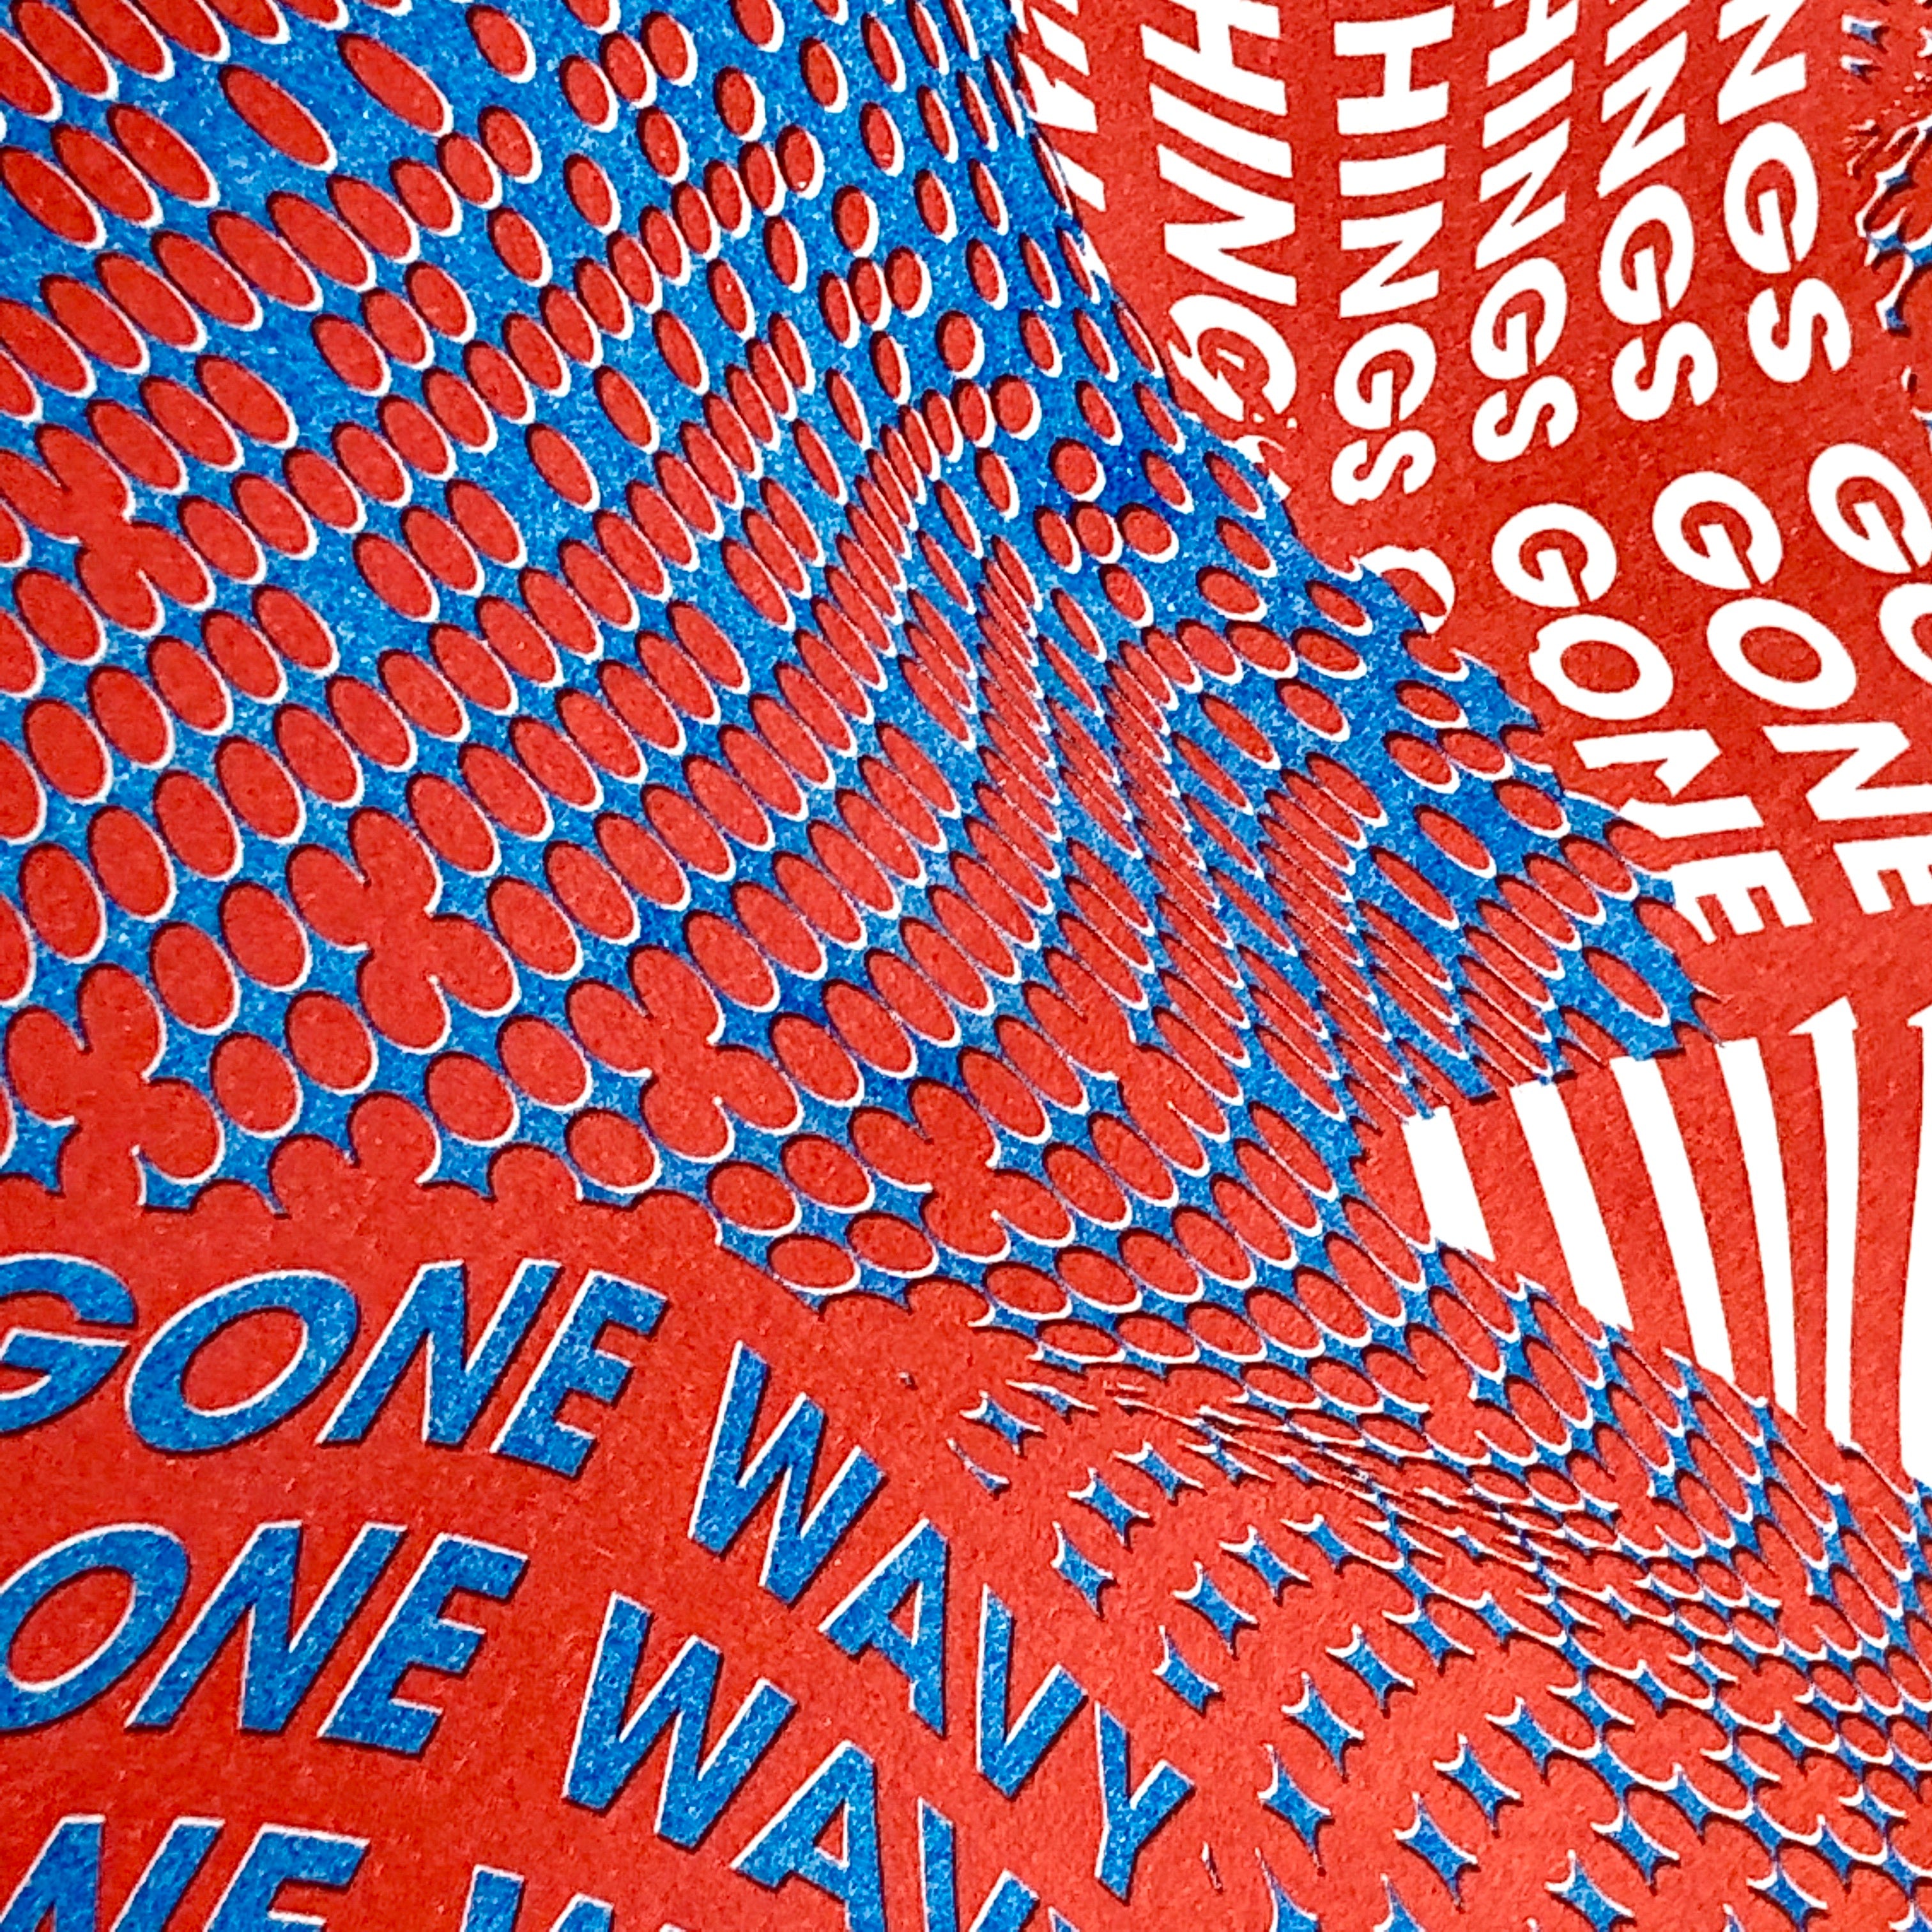 EVERYTHING’S GONE WAVY A3 Risograph Print